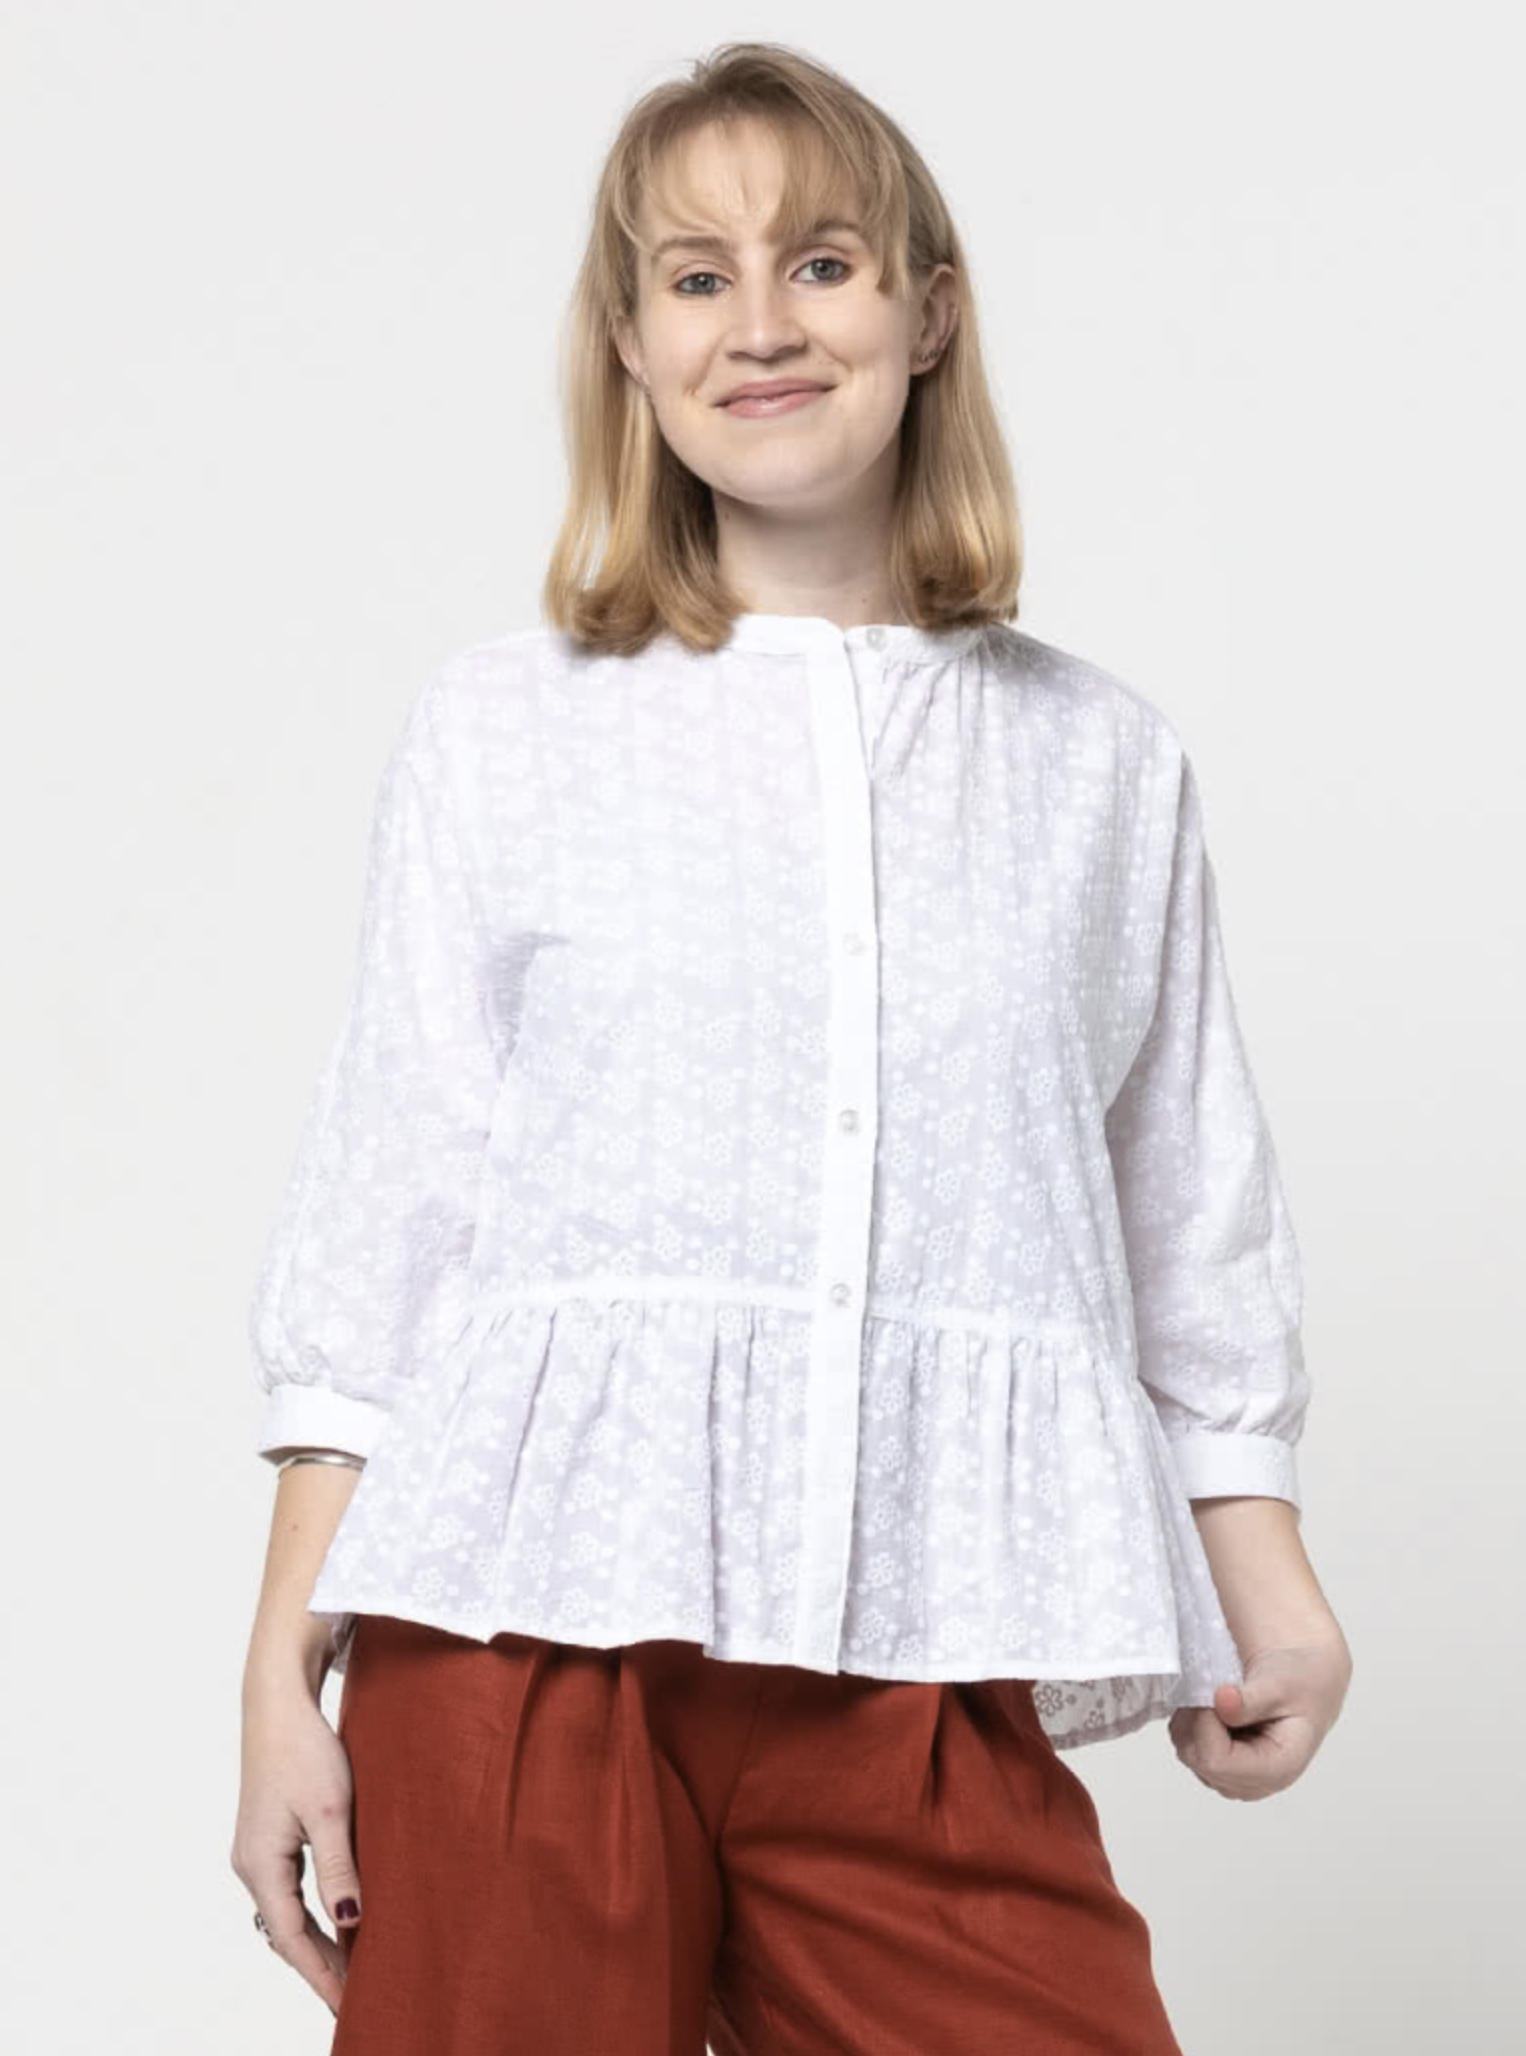 Woman wearing the Blossom Woven Top sewing pattern from Style Arc on The Fold Line. A blouse pattern made in voile, silk, rayon or crepe fabrics, featuring a front button closure, front dolman sleeve and back set-in sleeve, gathered front neck and back yo